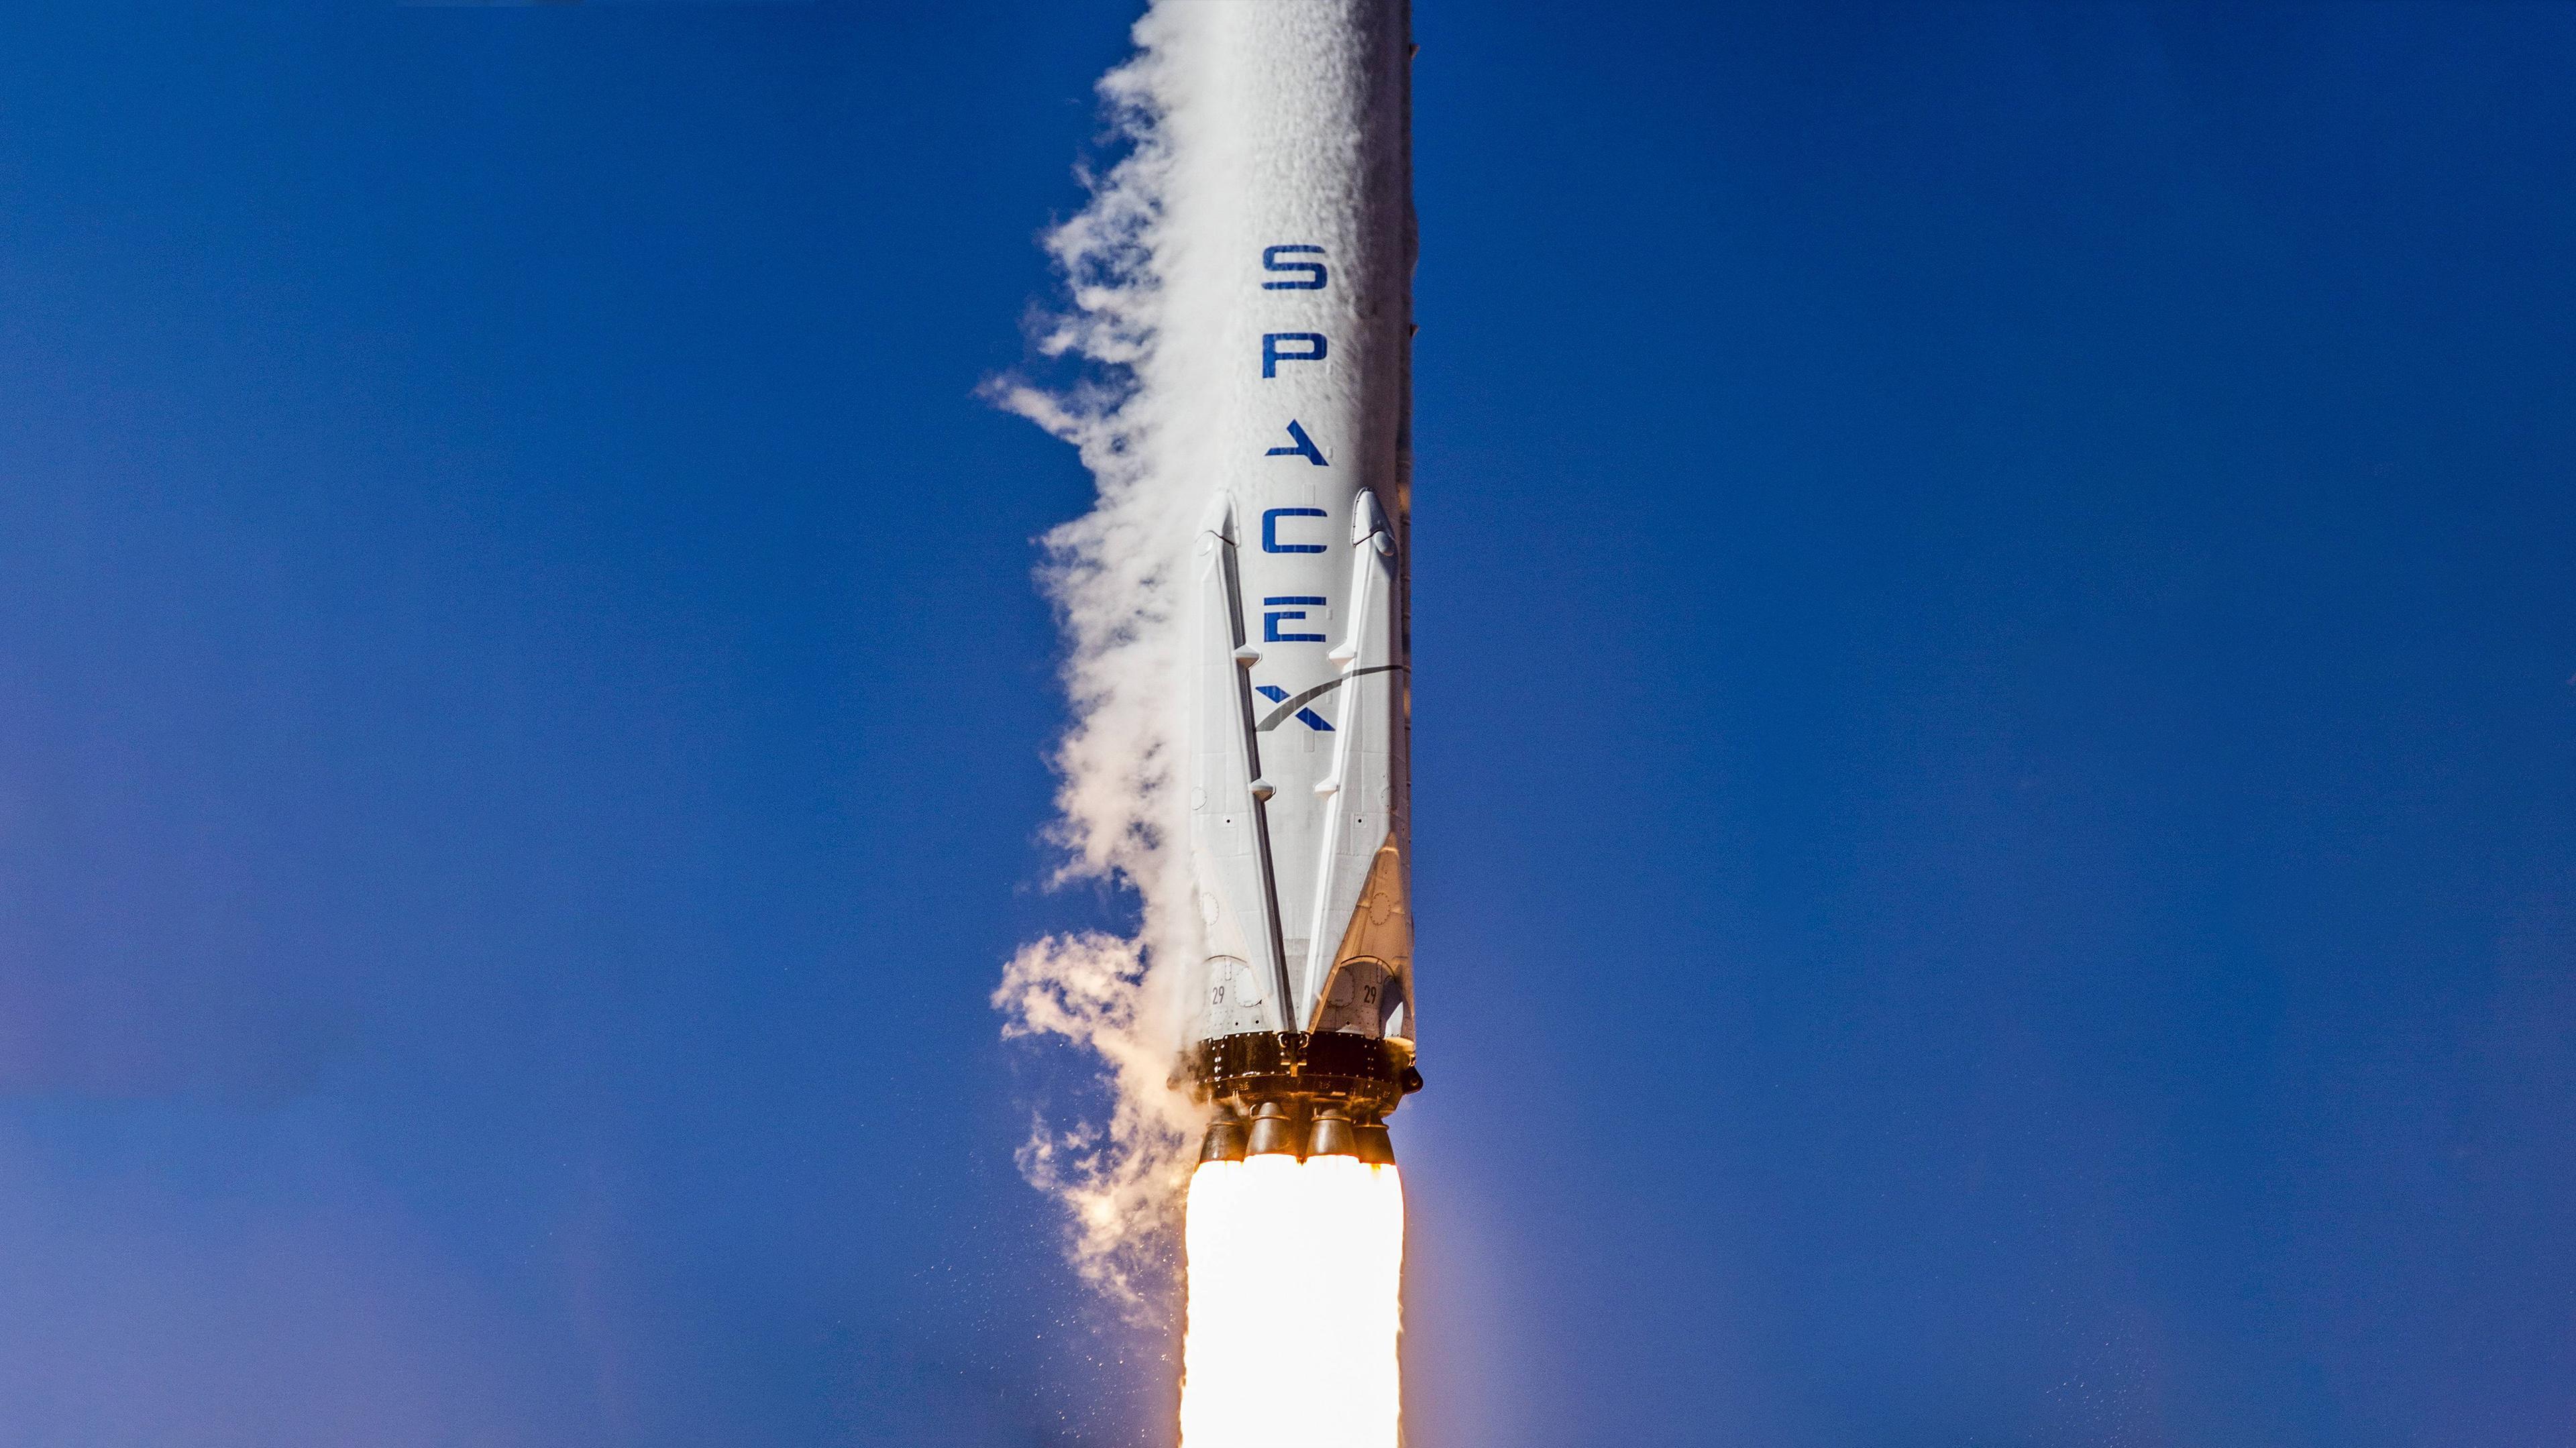 Made A 4k Wallpaper From Spacex Iridium Launch R